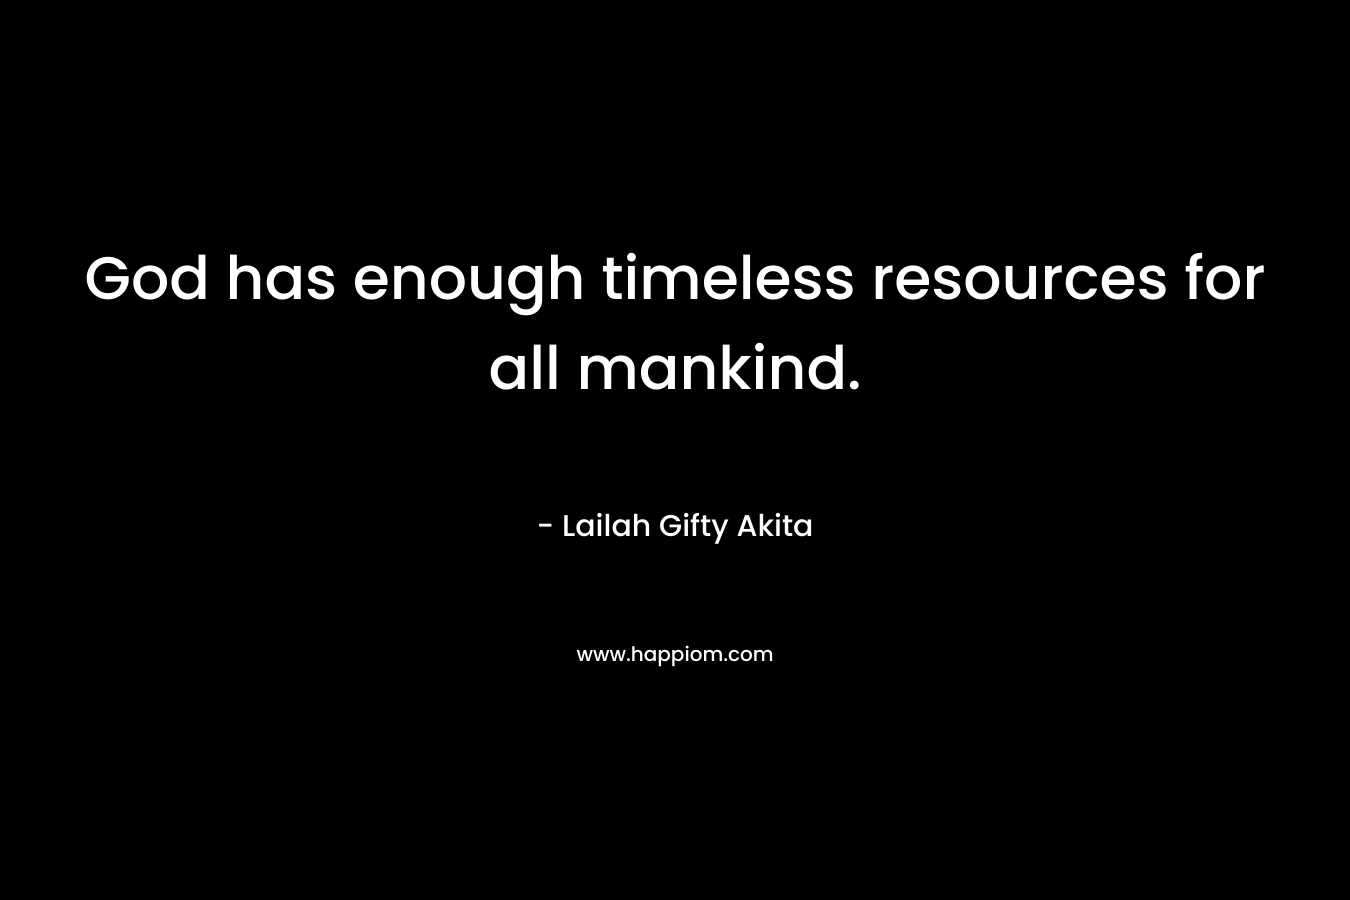 God has enough timeless resources for all mankind.